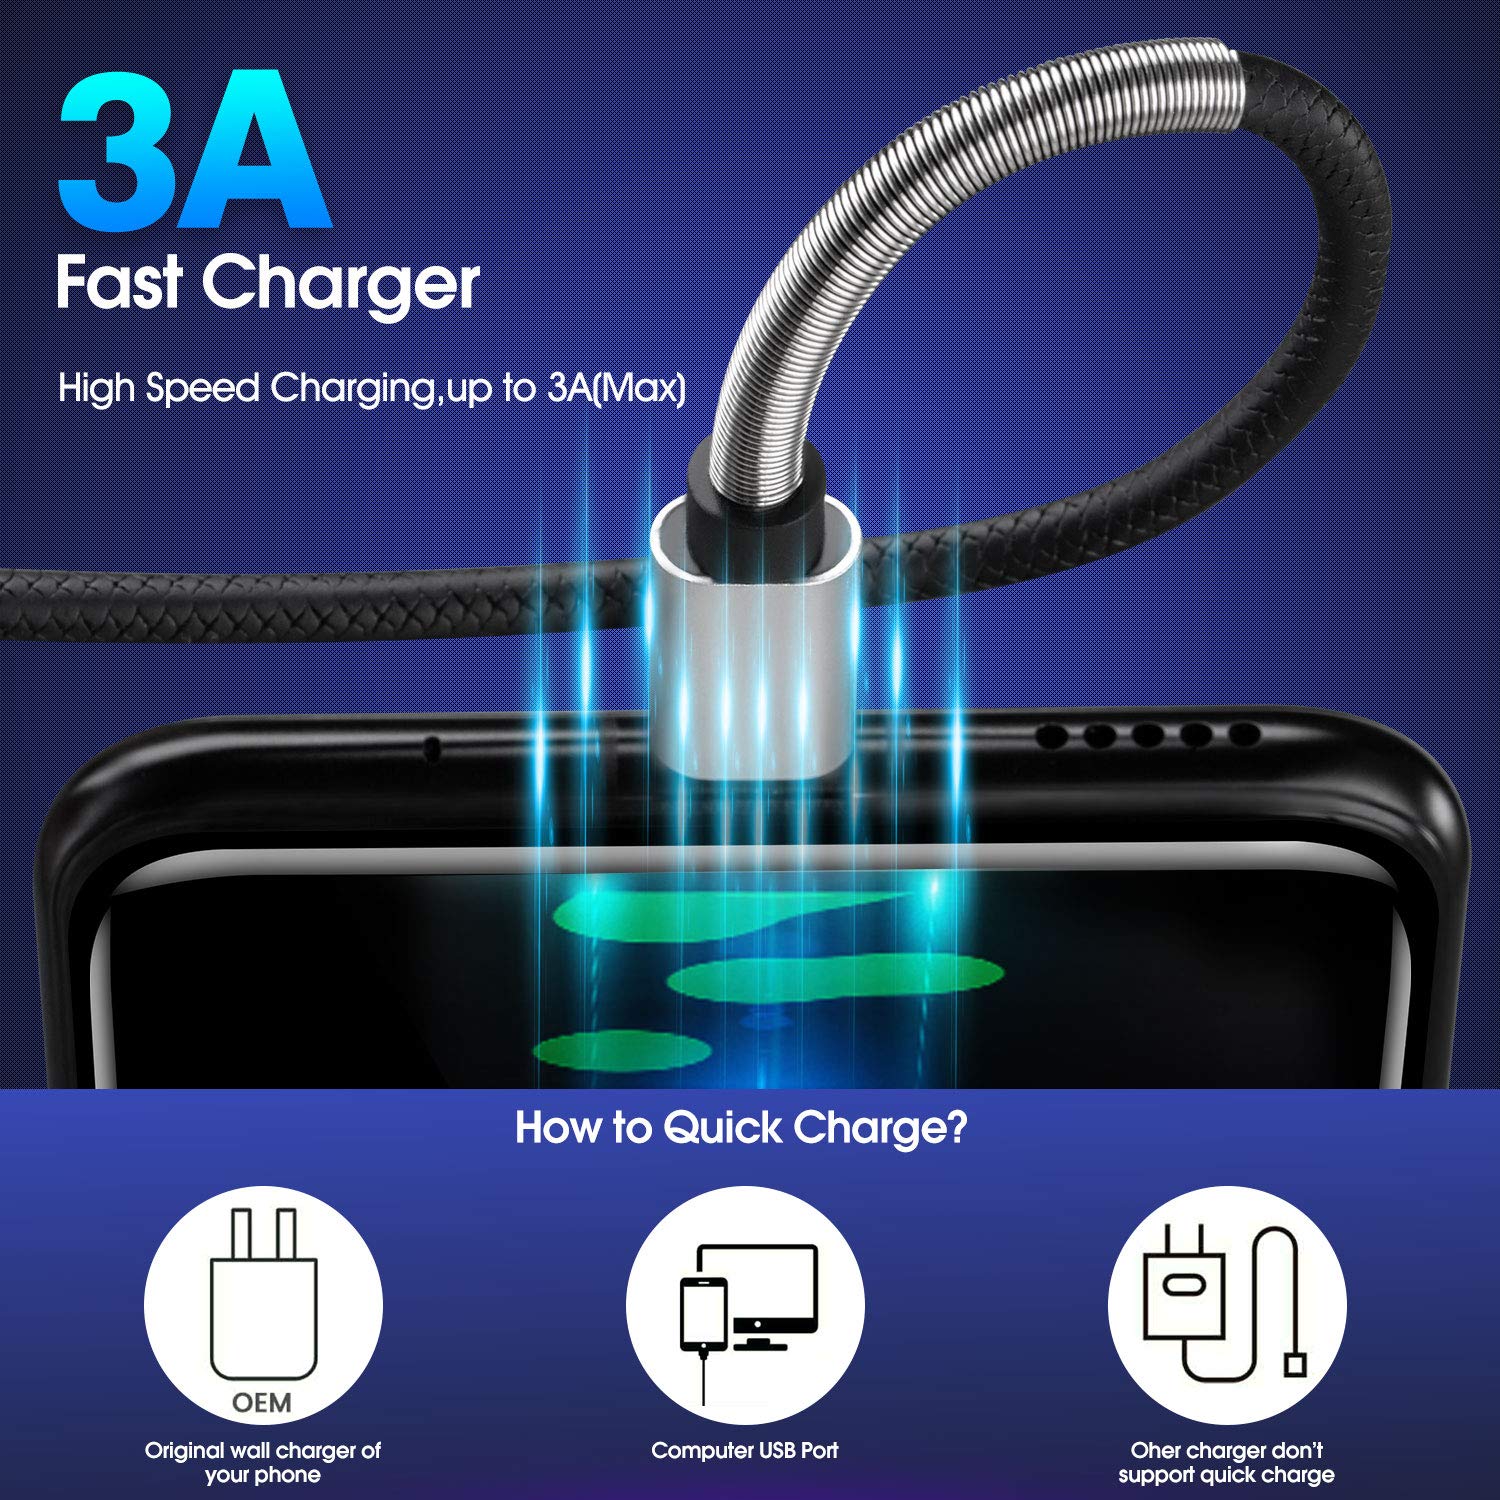 [3Pack 6ft] Compatible with Samsung Galaxy S9 S10 S8 Plus Charger Cord(3A Fast Charging), TPE USB C Type Charger Cable,USB A to Type C Replacement for Samsung A32/A12/A10e/A20/A51/Note 20/9/8,LG